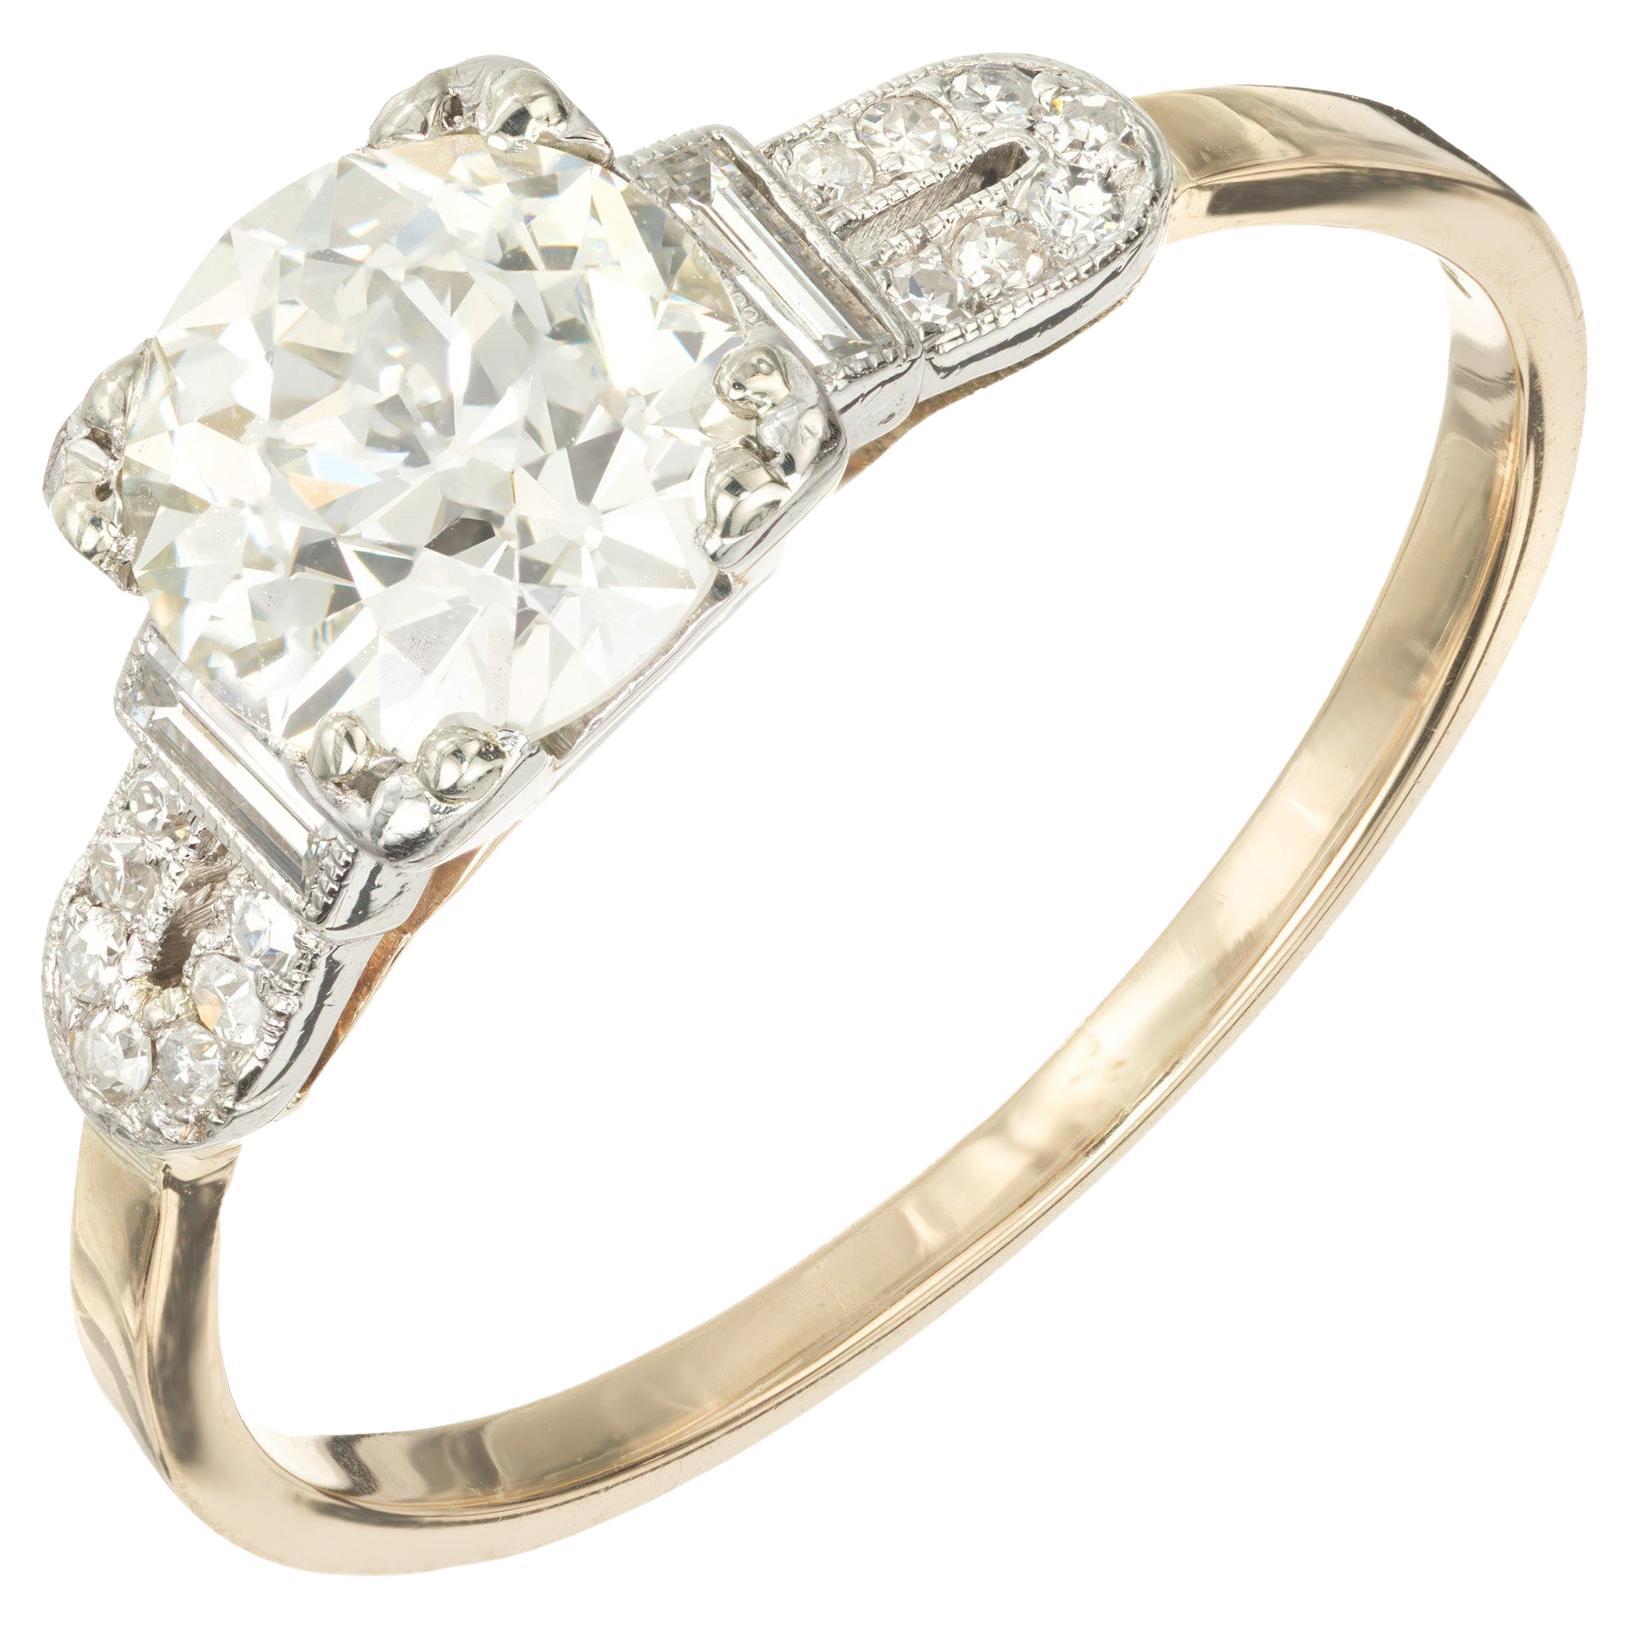 GIA Certified 1.39 Carat Diamond Two Tone Gold Art Deco Engagement Ring